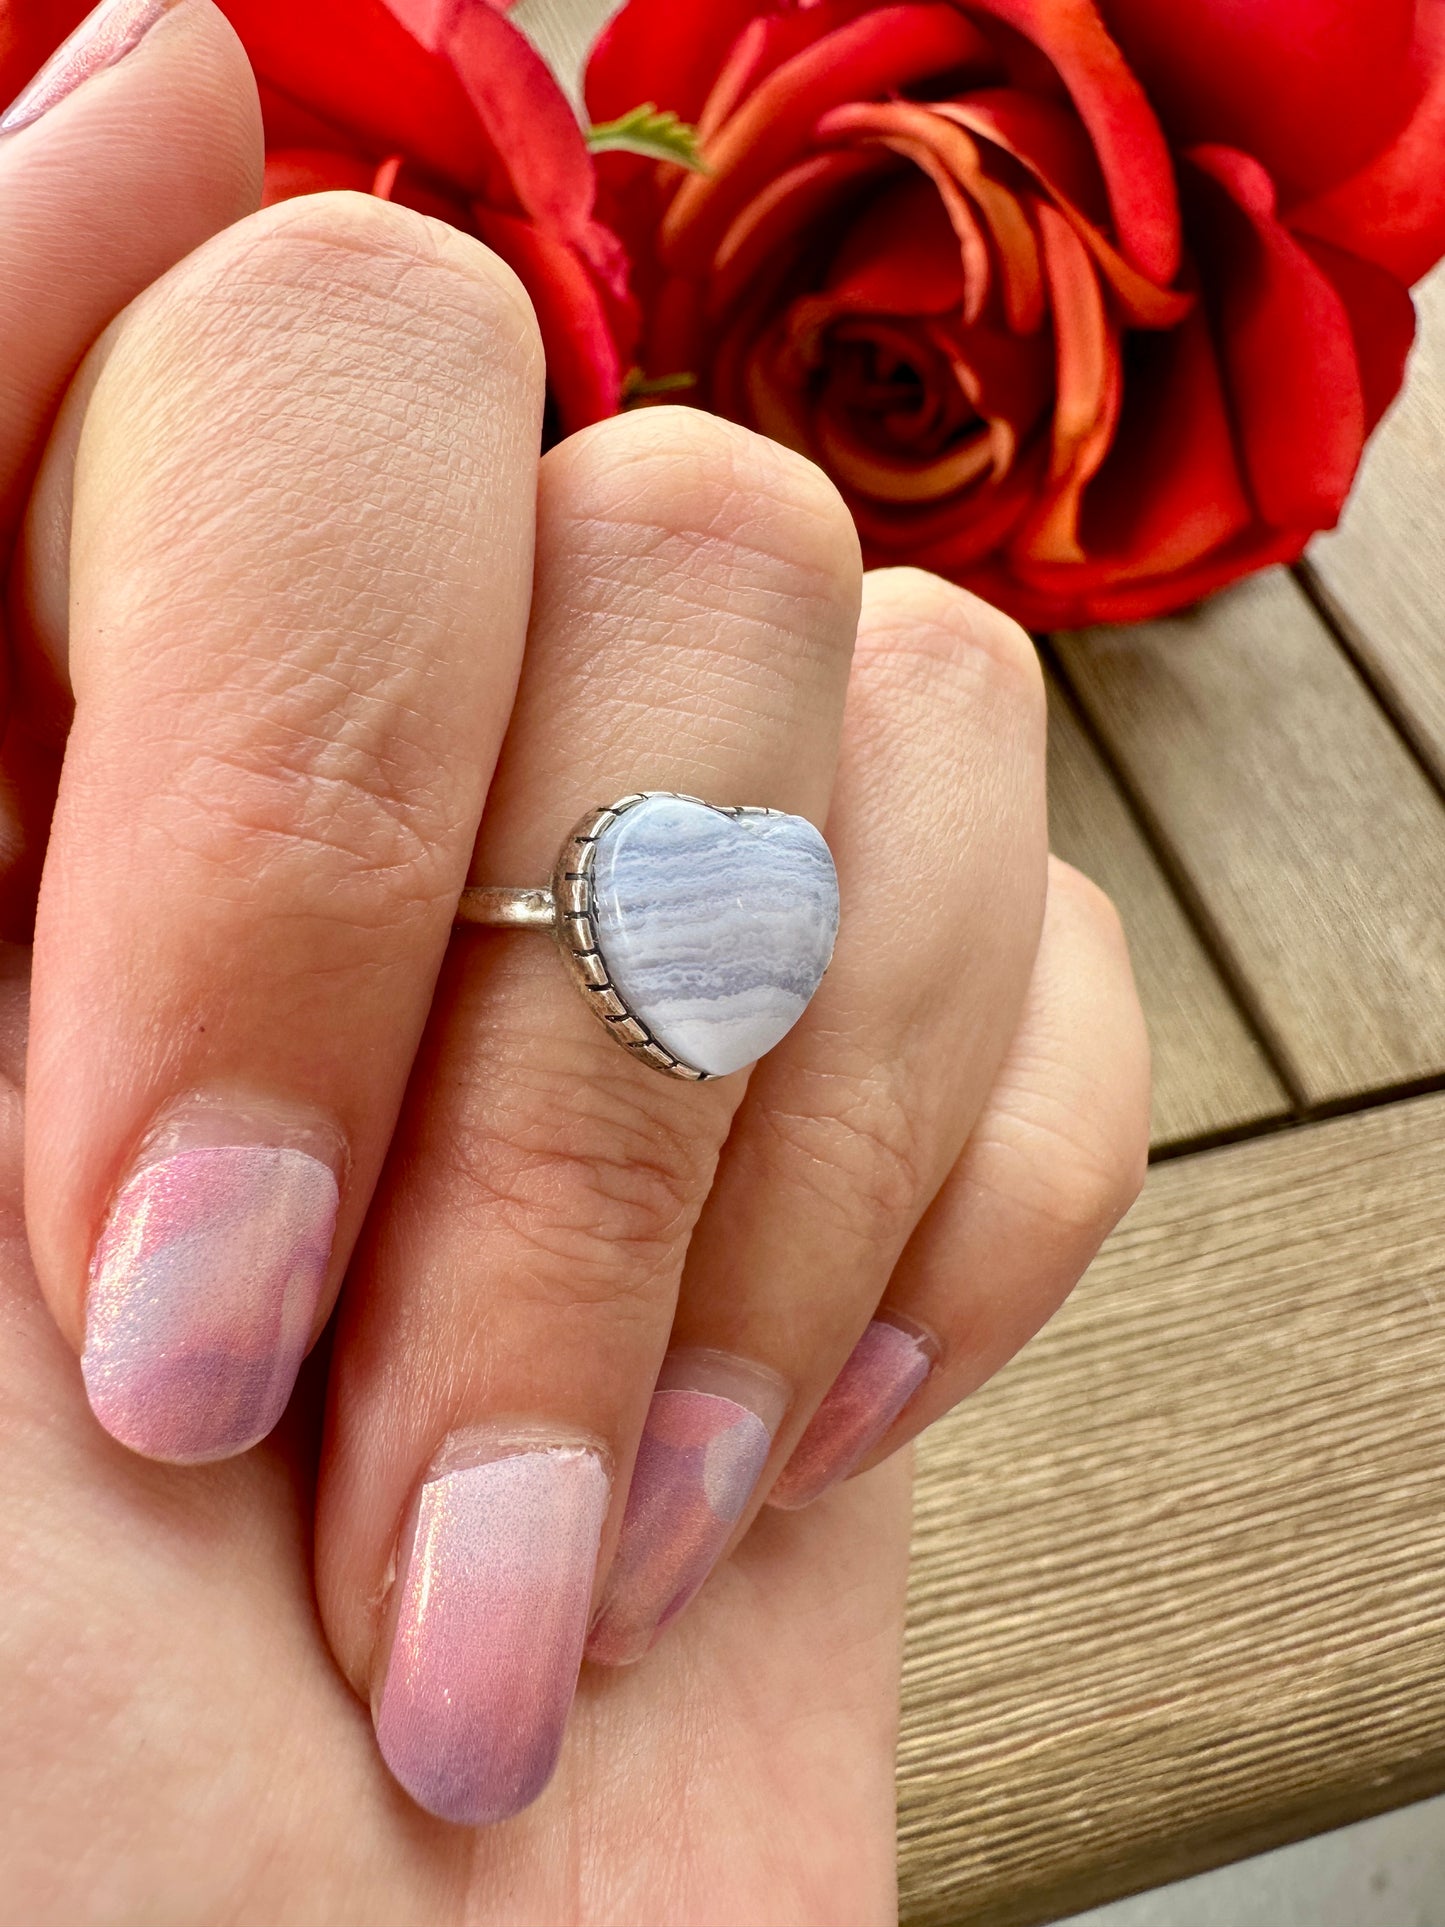 Adjustable Sterling Silver Ring Featuring Blue Lace Agate - A Symbol of Serenity & Calmness, Perfect for Everyday Elegance